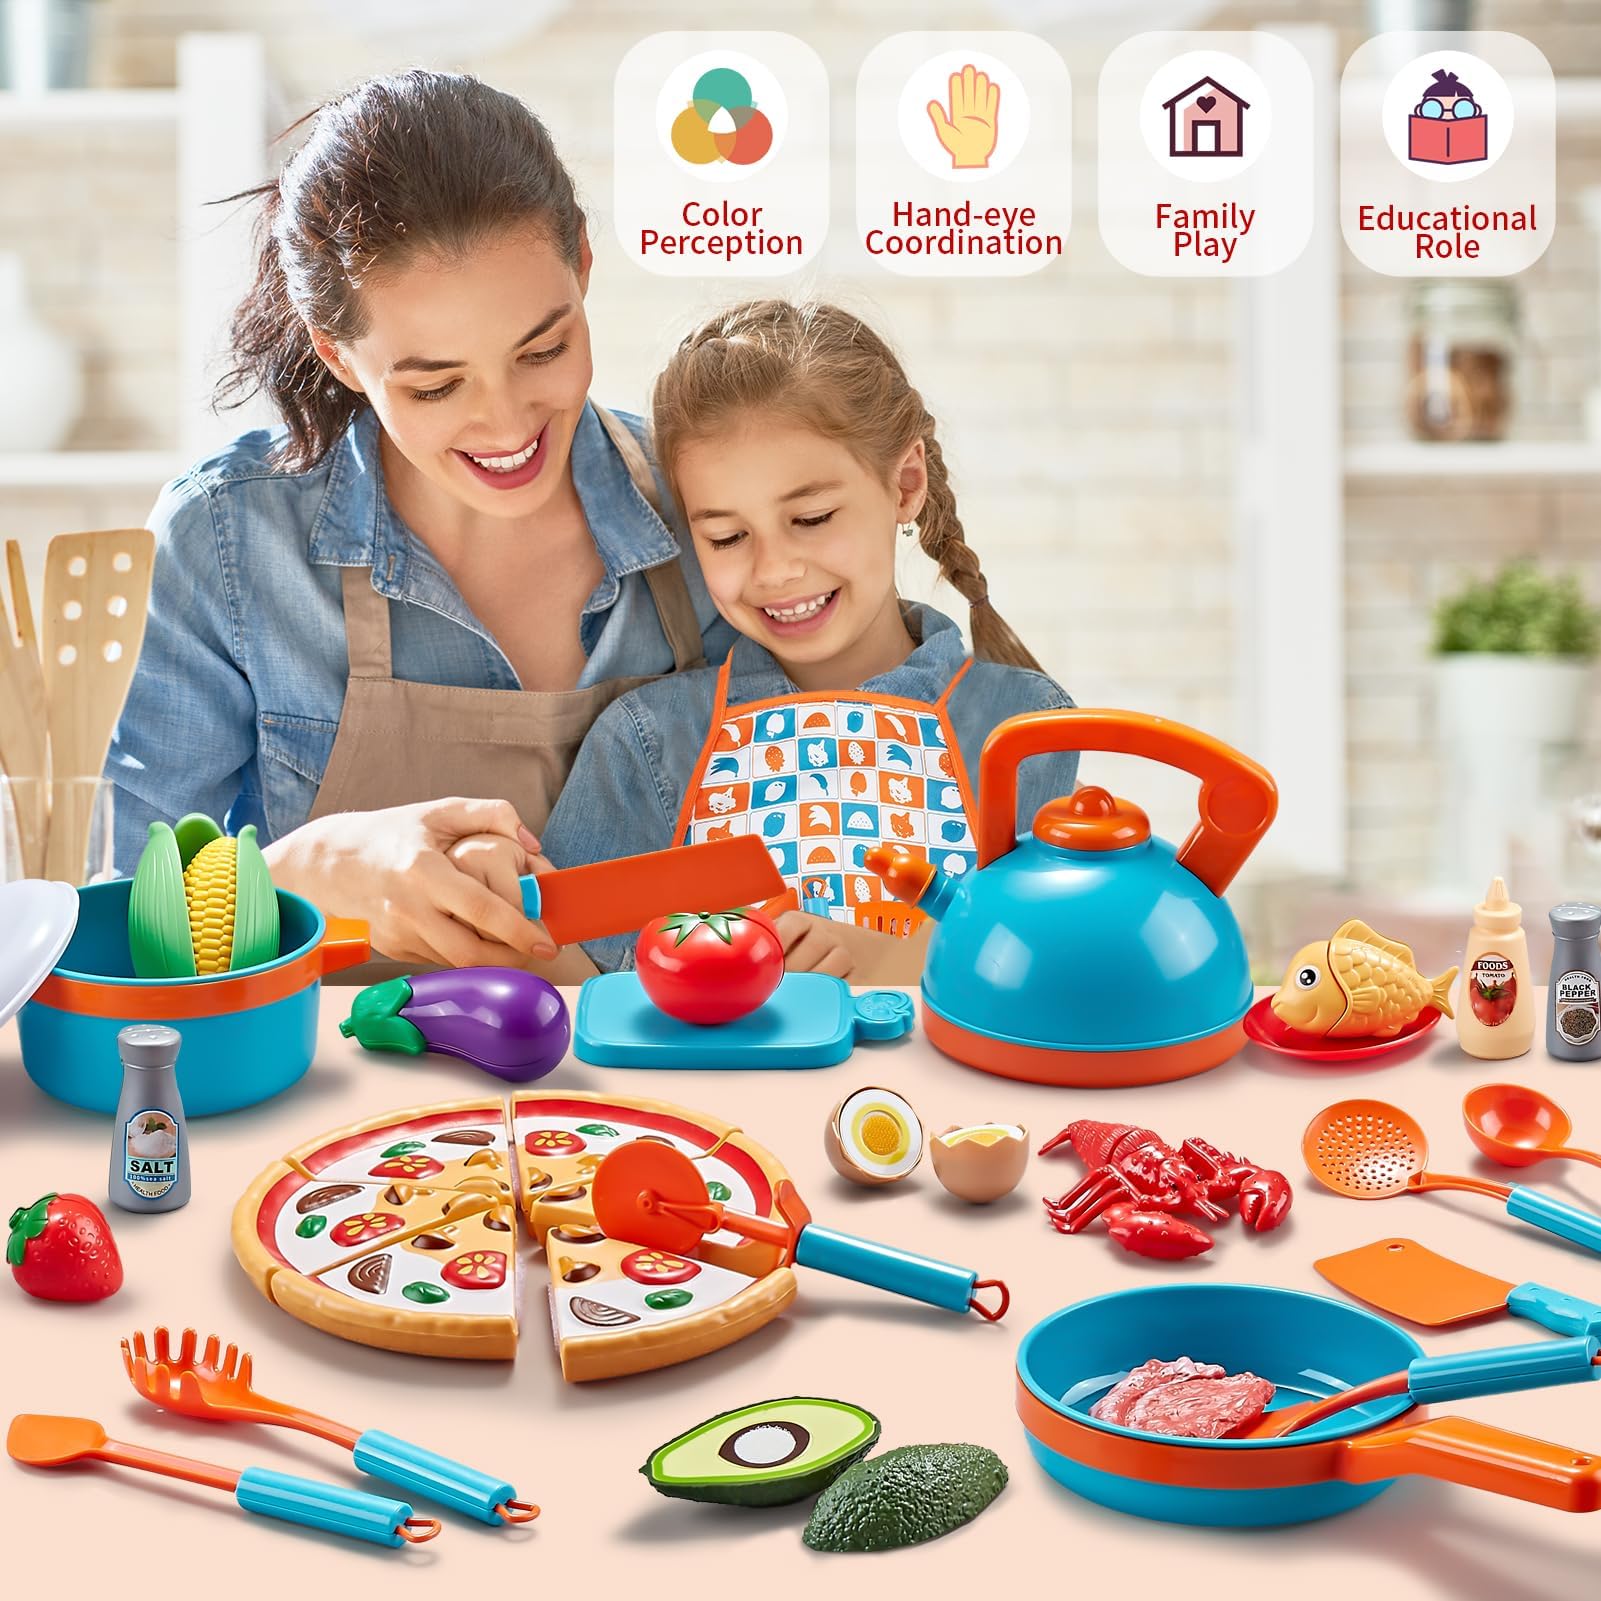 Laugigle Play Kitchen Accessories - 46Pc Kids Kitchen Playset with Kids Pots and Pans Playset, Pizza Toy, Play Food with Play Fruit Veggies, Kitchen Toys, Cooking Utensils Toy, Apron, Boys Girls Gift